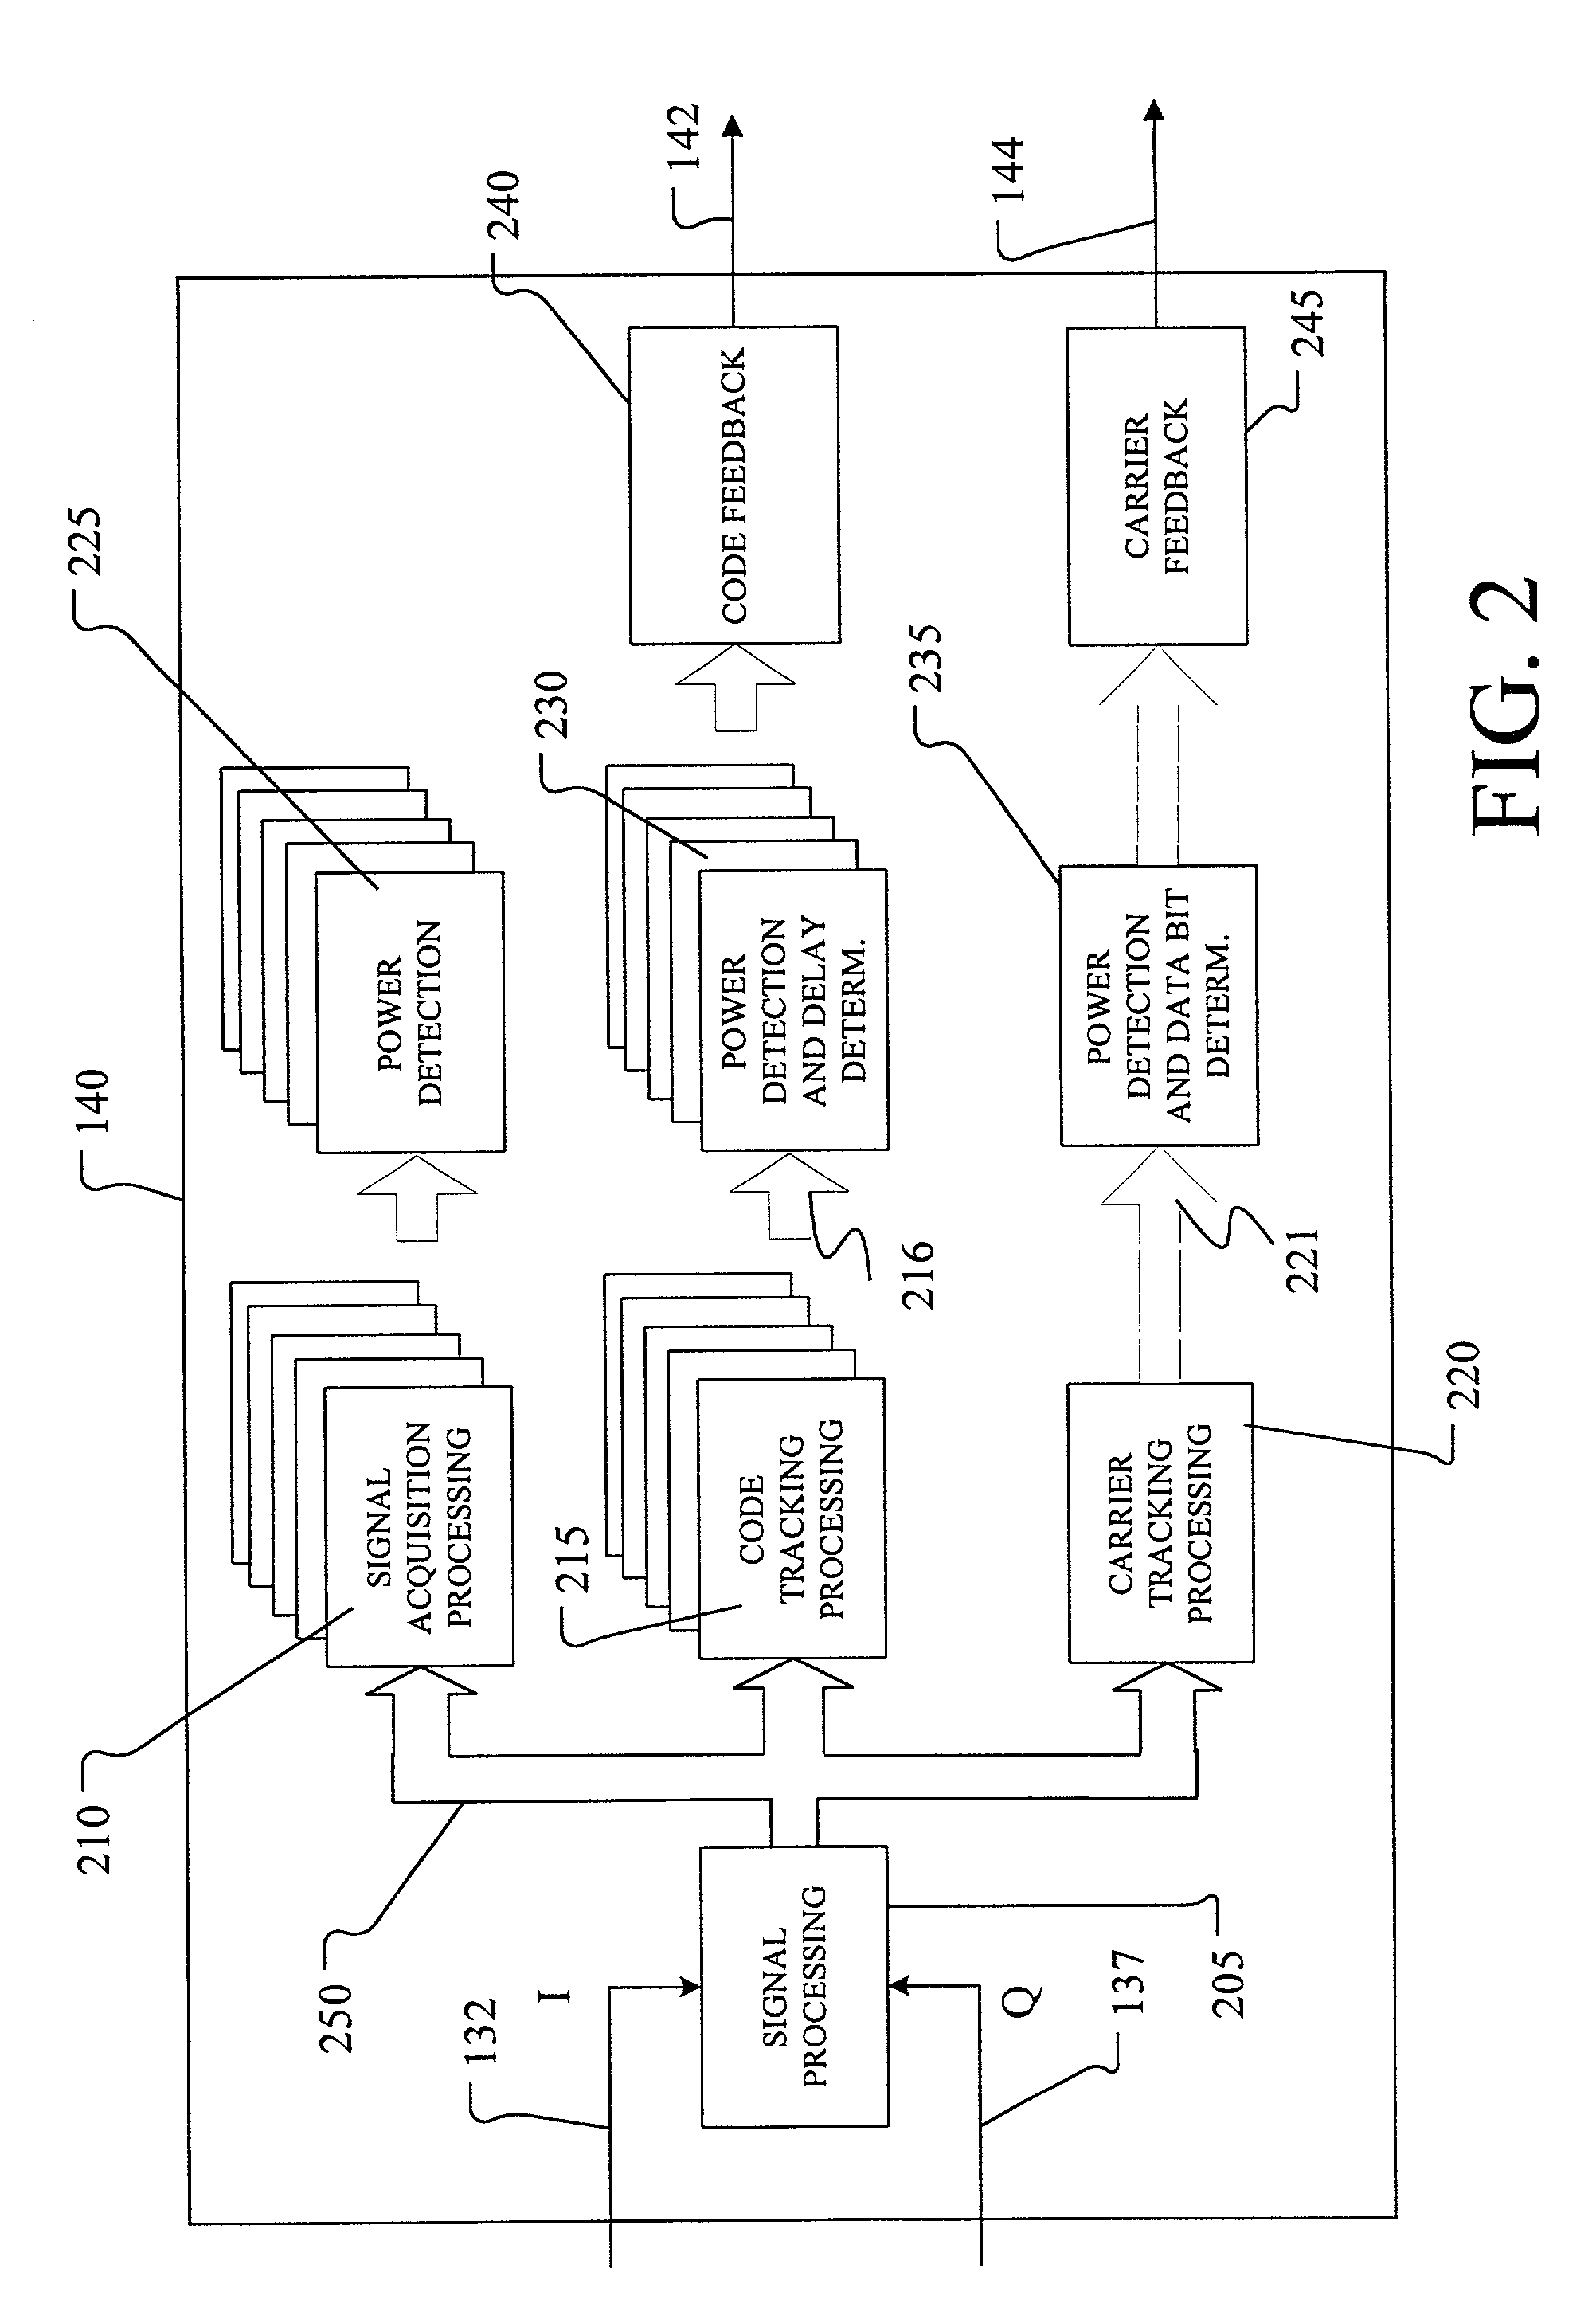 Method of enhancing signal tracking in global positioning system receivers